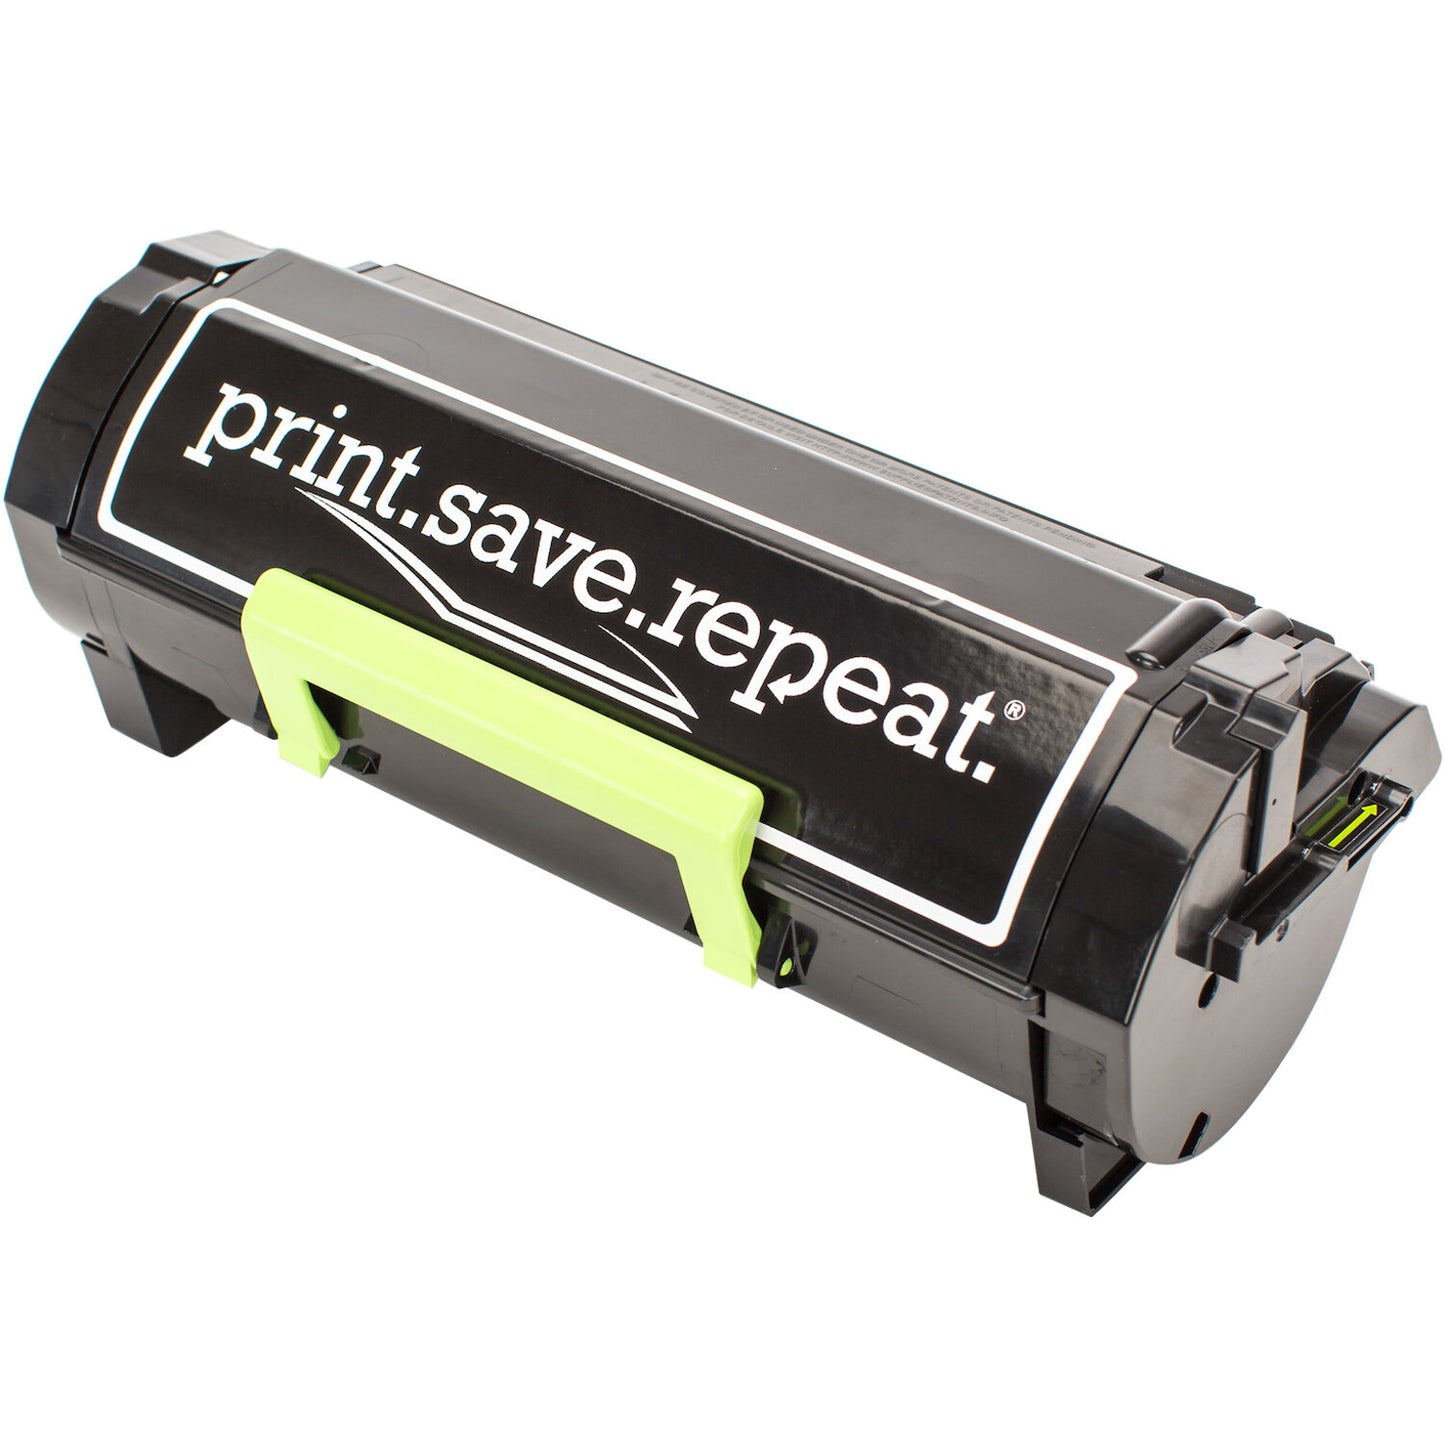 Print.Save.Repeat. Lexmark 51B1X00 Remanufactured Extra High Yield Toner Cartridge for MS517, MS617, MX517, MX617 [20,000 Pages]